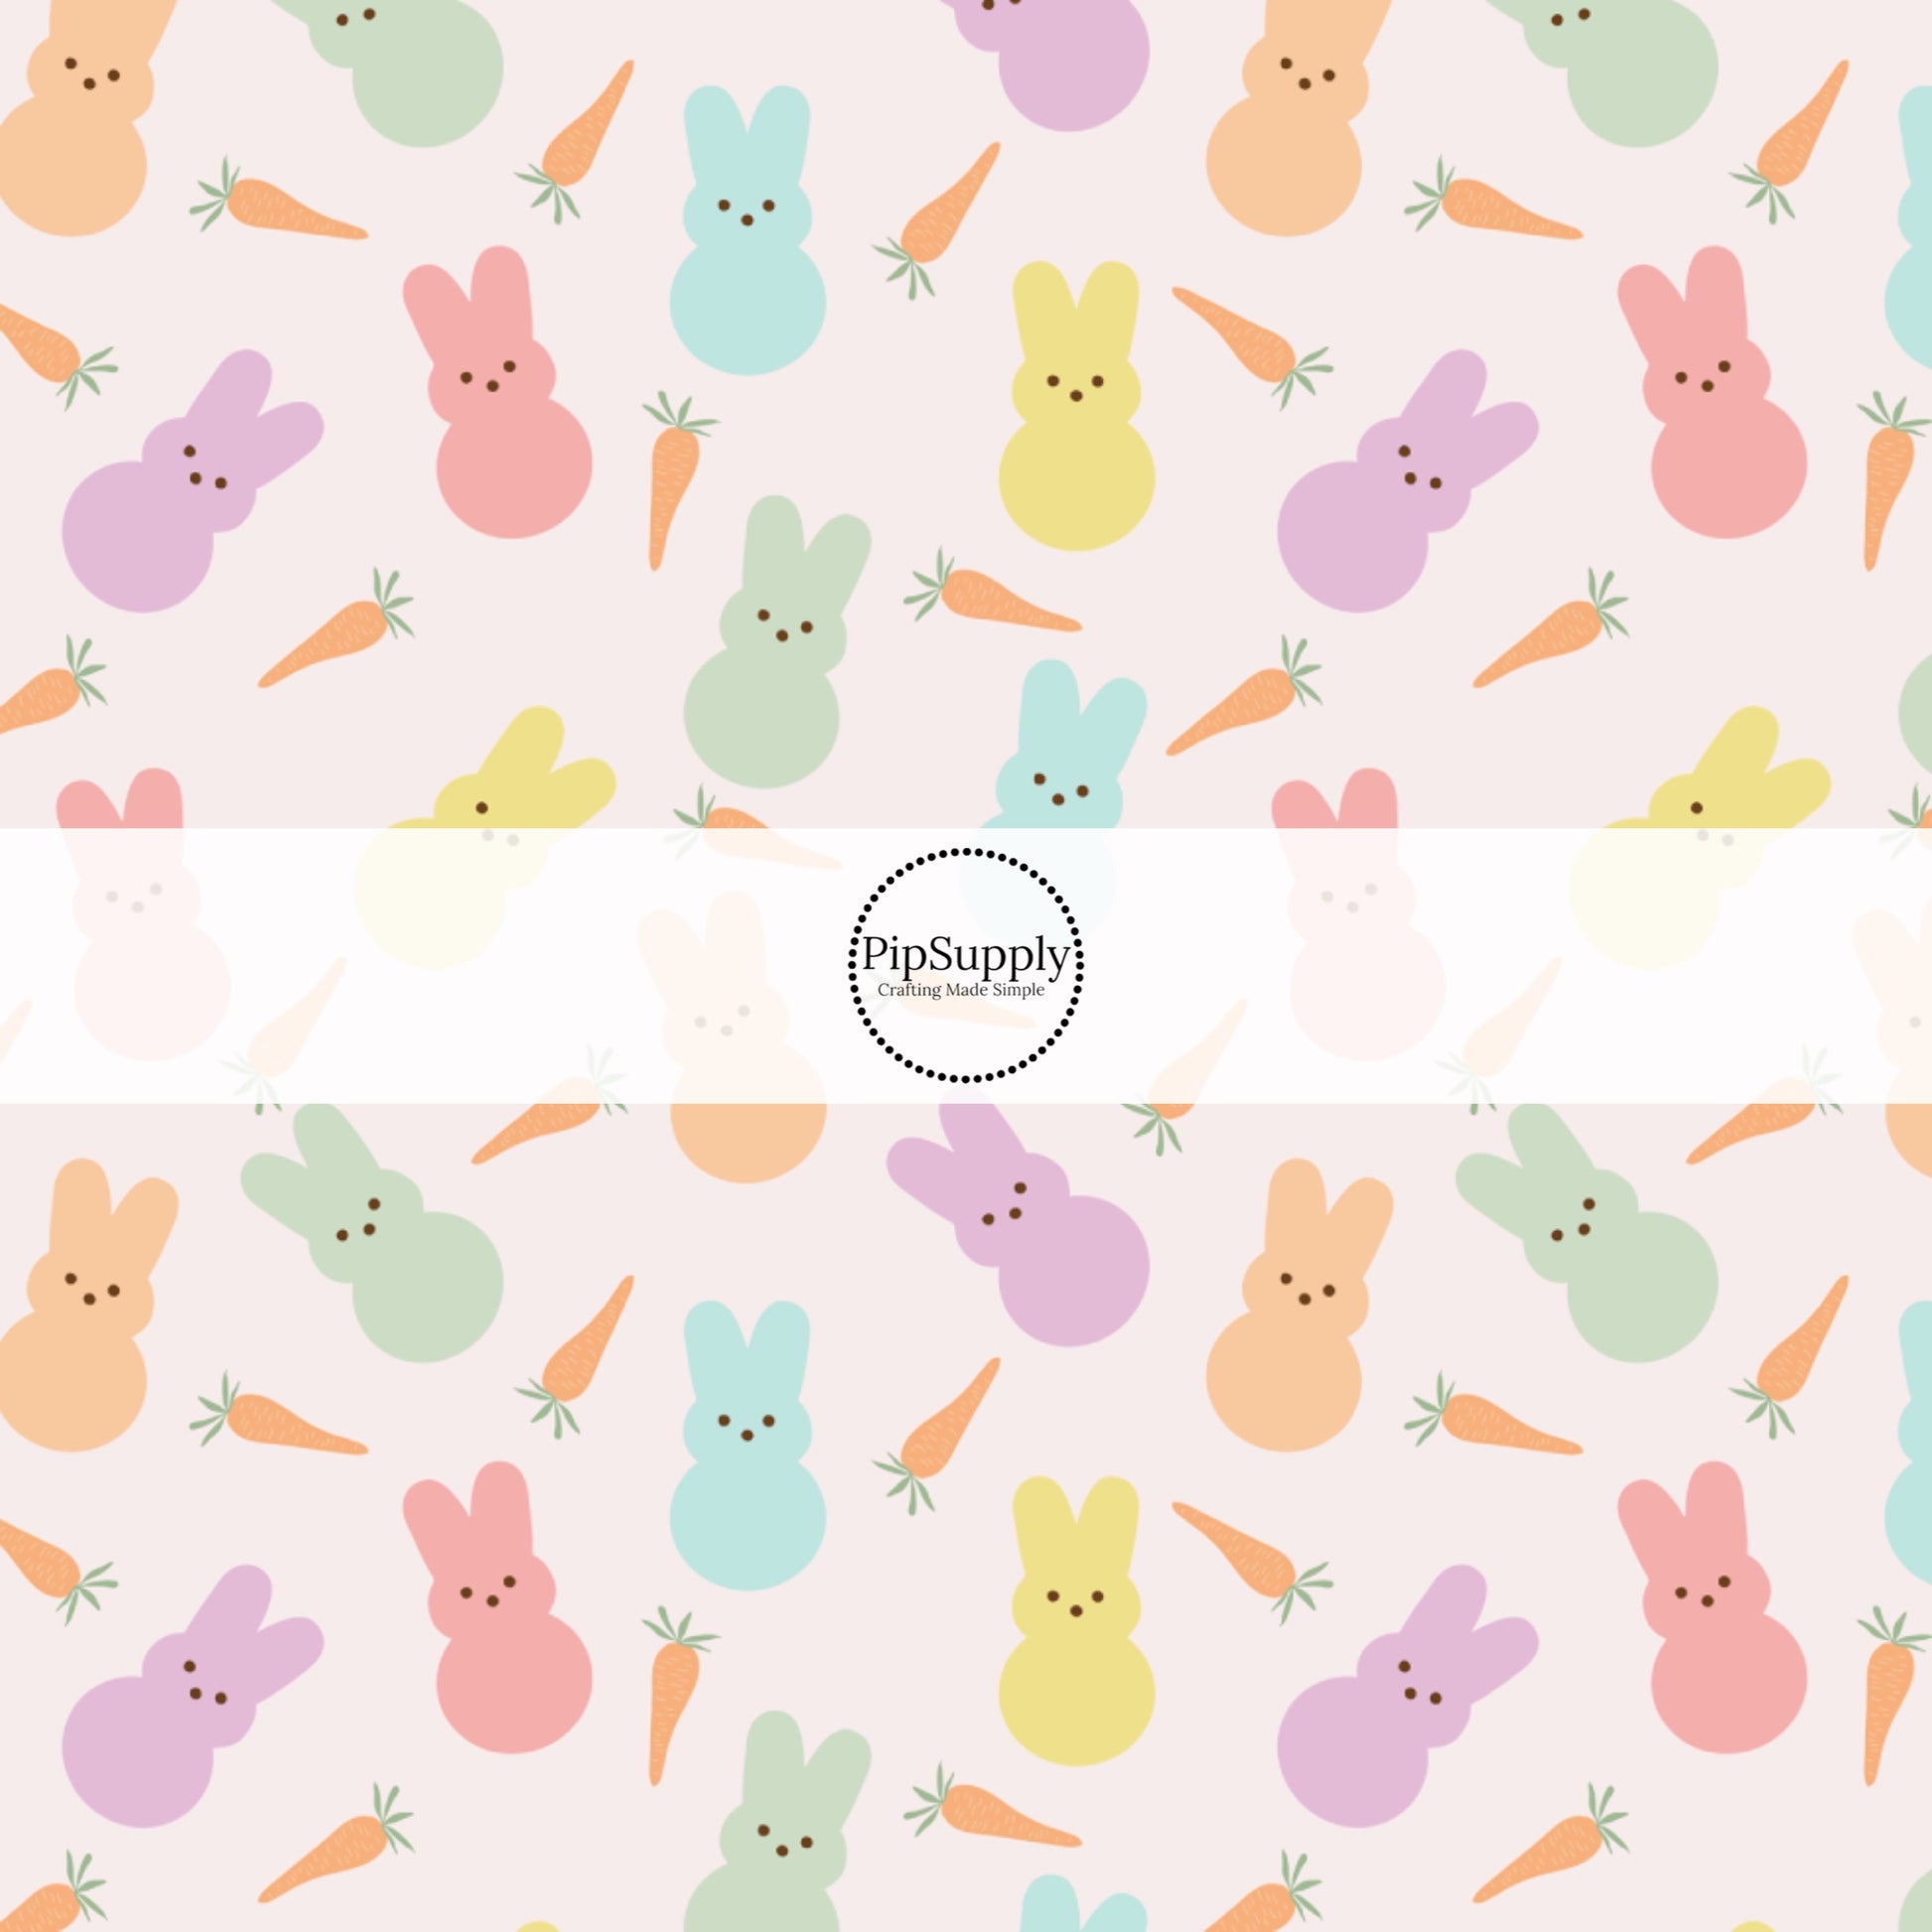 Fluffy Marshmallow Bunnies and Carrots on Cream Fabric by the Yard.